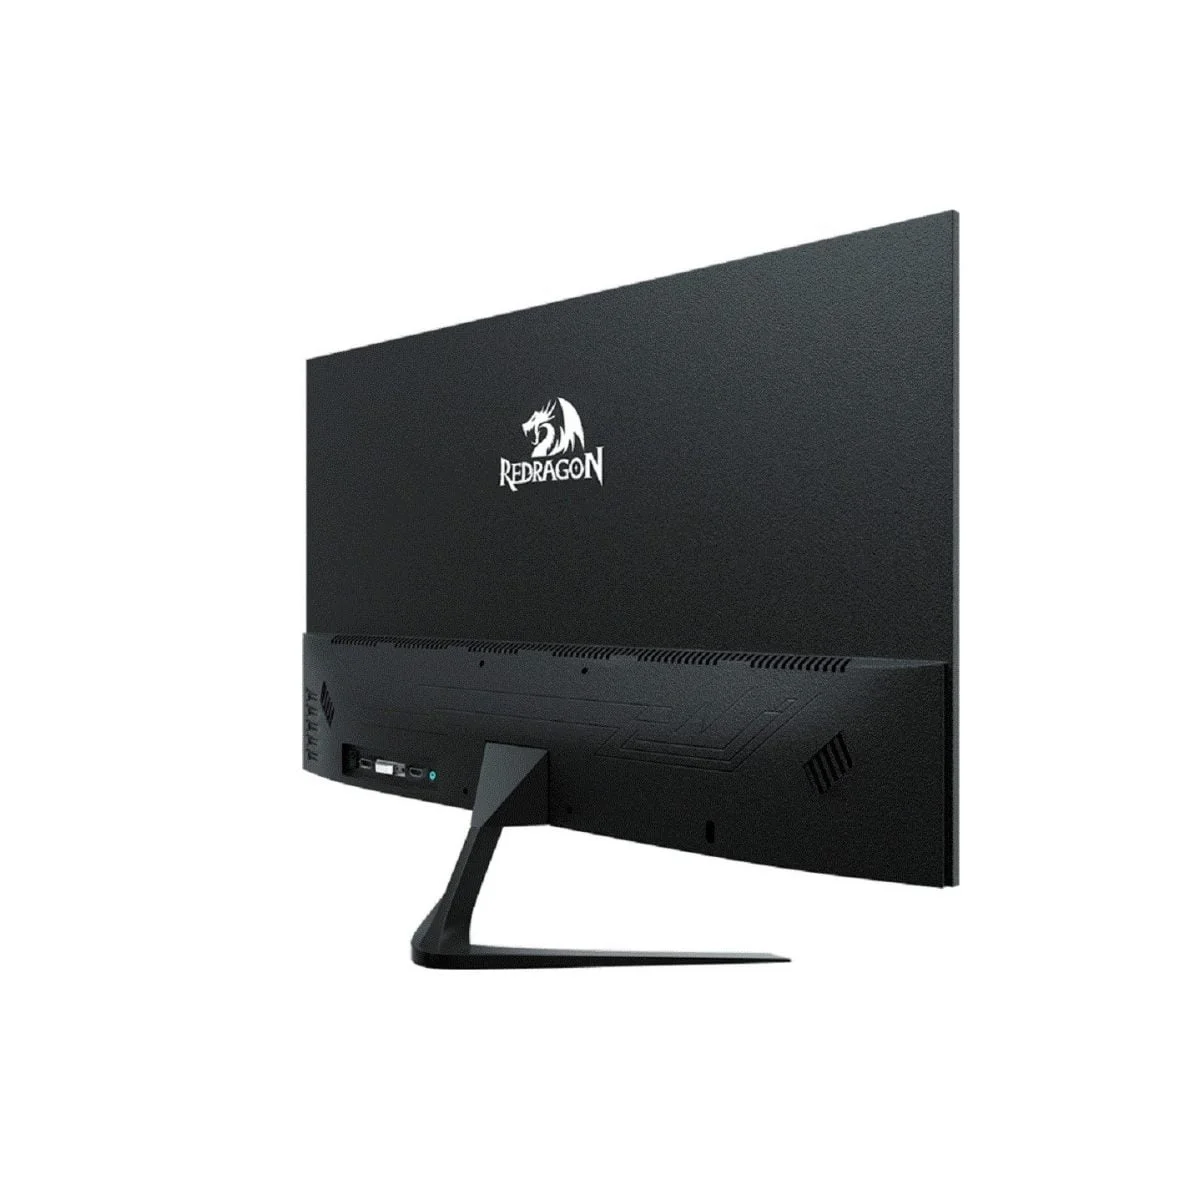 Ea84Df19Ff9080707De557Da1Fcd7D75 Hi Redragon &Lt;H1&Gt;Redragon Emerald 27” Gaming Monitor - Gm270F165&Lt;/H1&Gt; &Lt;Span Style=&Quot;Font-Size: 16Px;&Quot;&Gt;A Standard Monitor Is Just The Visual Output Of The Computing Process. A Gaming Monitor, On The Other Hand, Is An Instrument That Must Be Capable Of Representing An Almost Infinite Beam Of Light, Color And Movement Graduations. To Serve Recreational And Competitive Play; To Exploit All The Graphic Power Of The Best Teams; To Show More, Faster And Better. That, At Least, Is The Mission That The Emerald Has Come To Fulfill.&Lt;/Span&Gt; Gaming Monitor Redragon Emerald 27” Gaming Monitor